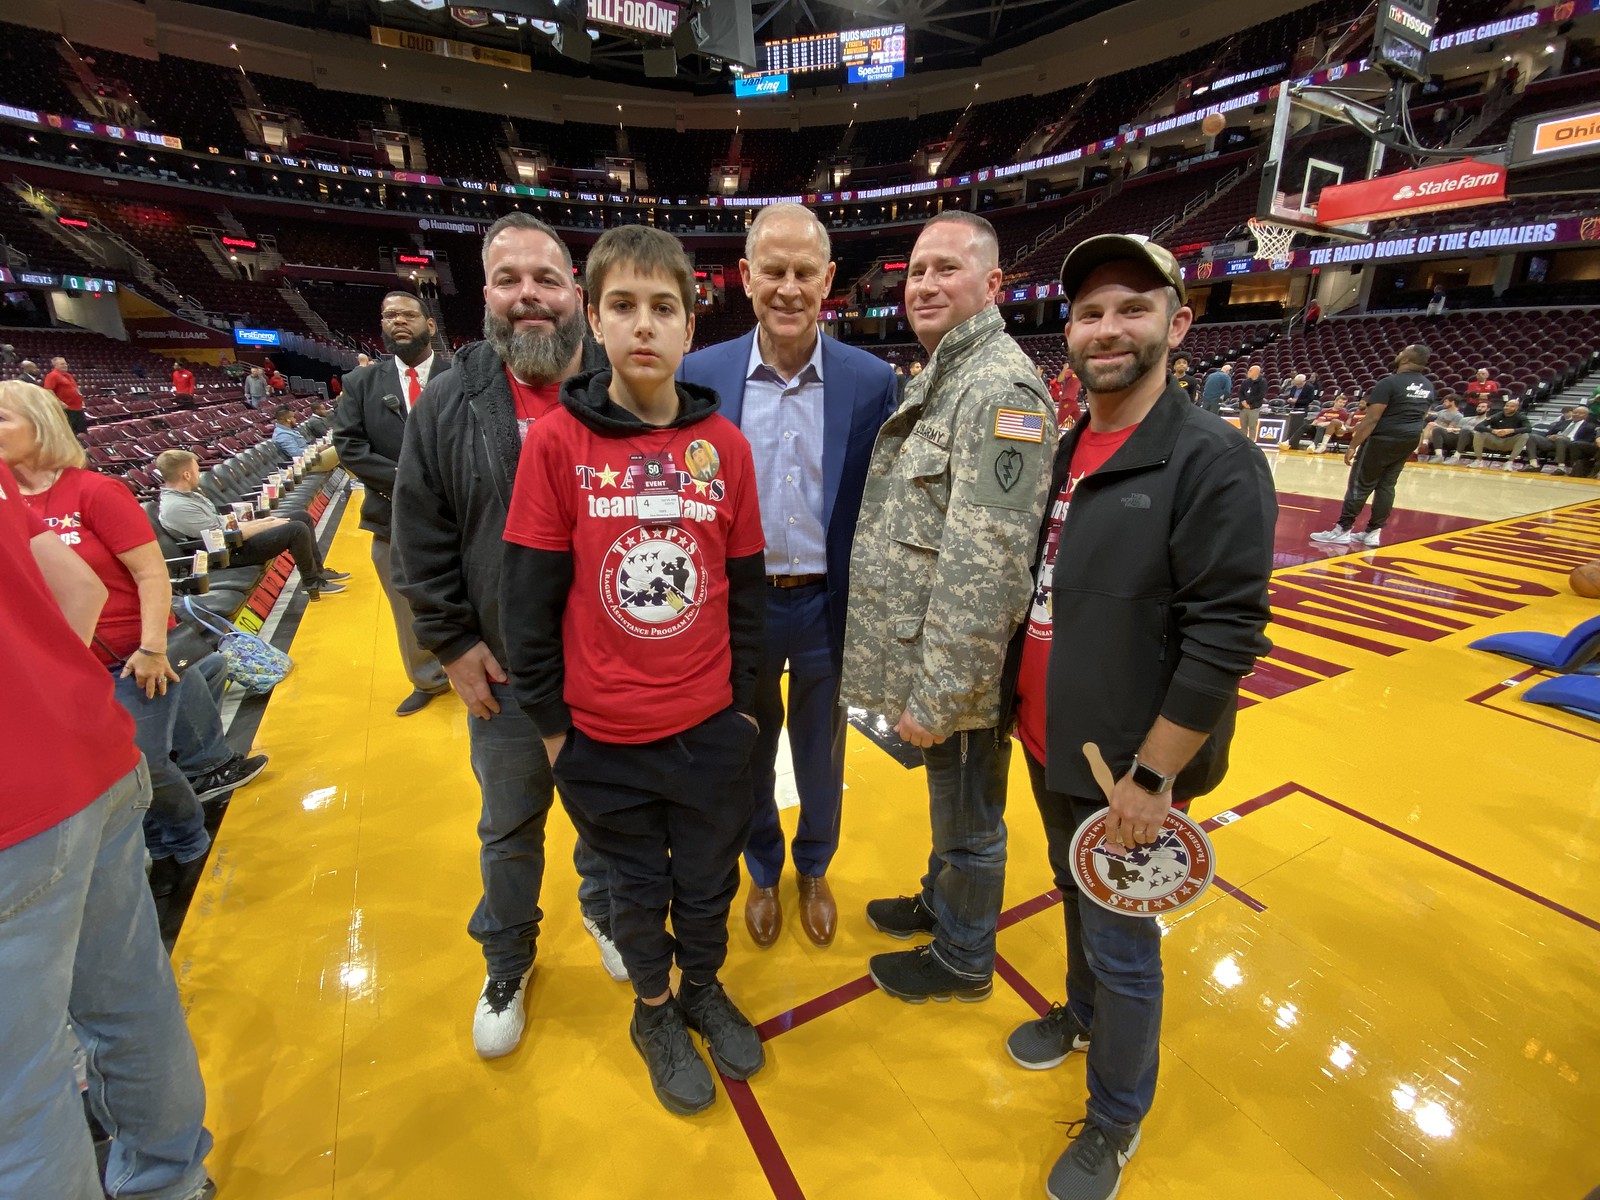 2019_T4T_Cleveland Cavaliers Hoops for Troops 15